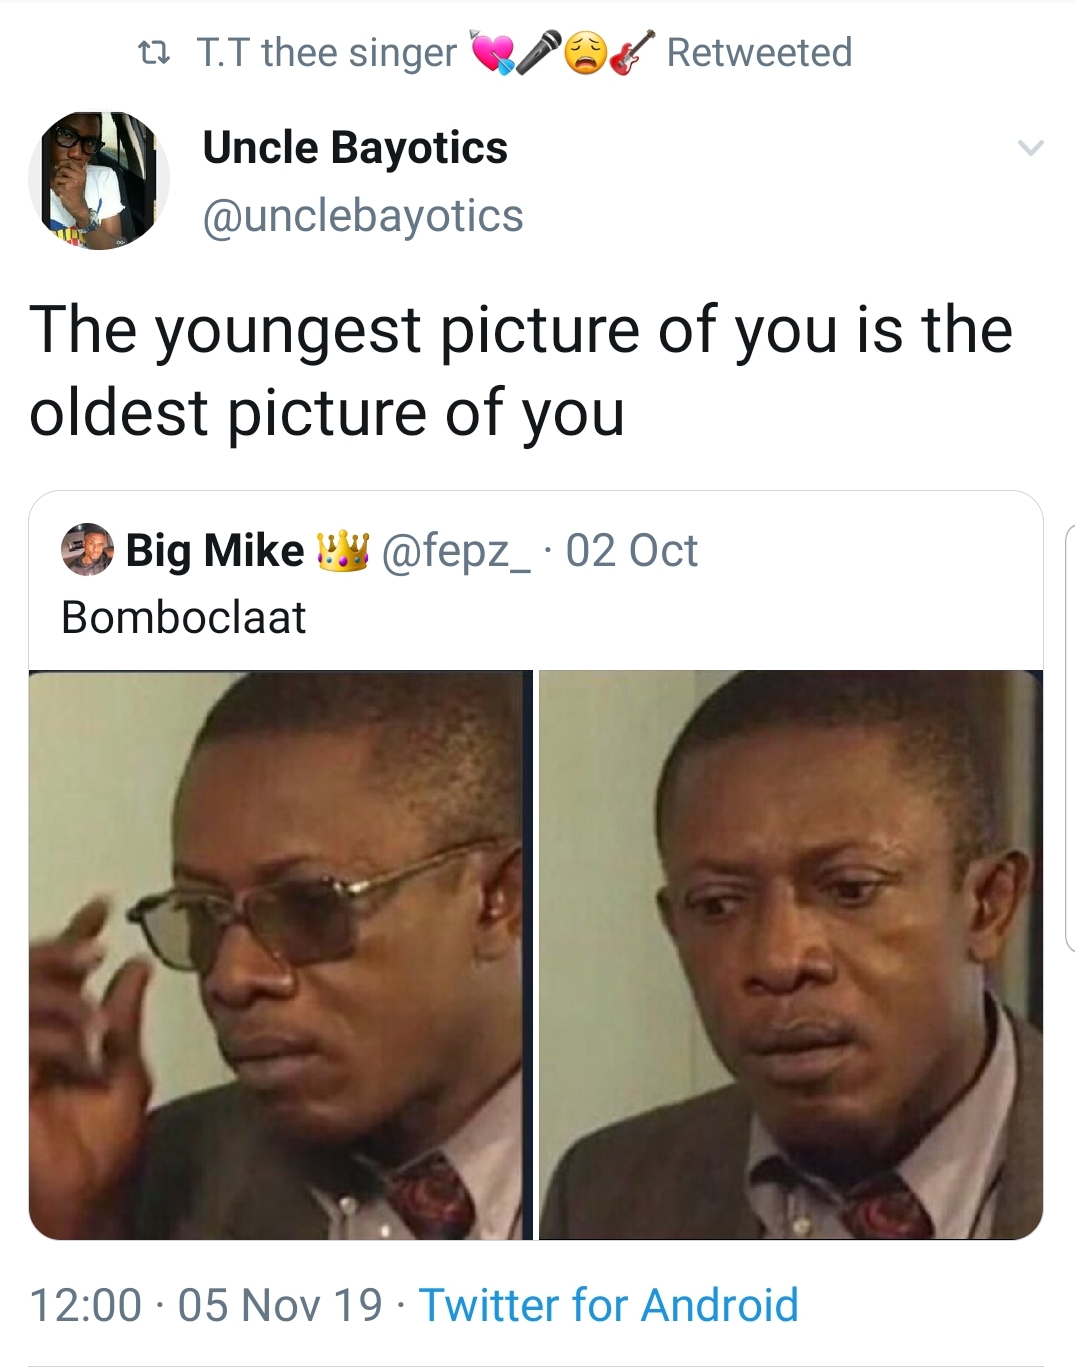 toe tips meme - 1 Tt thee singer Retweeted Uncle Bayotics The youngest picture of you is the oldest picture of you Big Mike! 02 Oct Bomboclaat 05 Nov 19. Twitter for Android